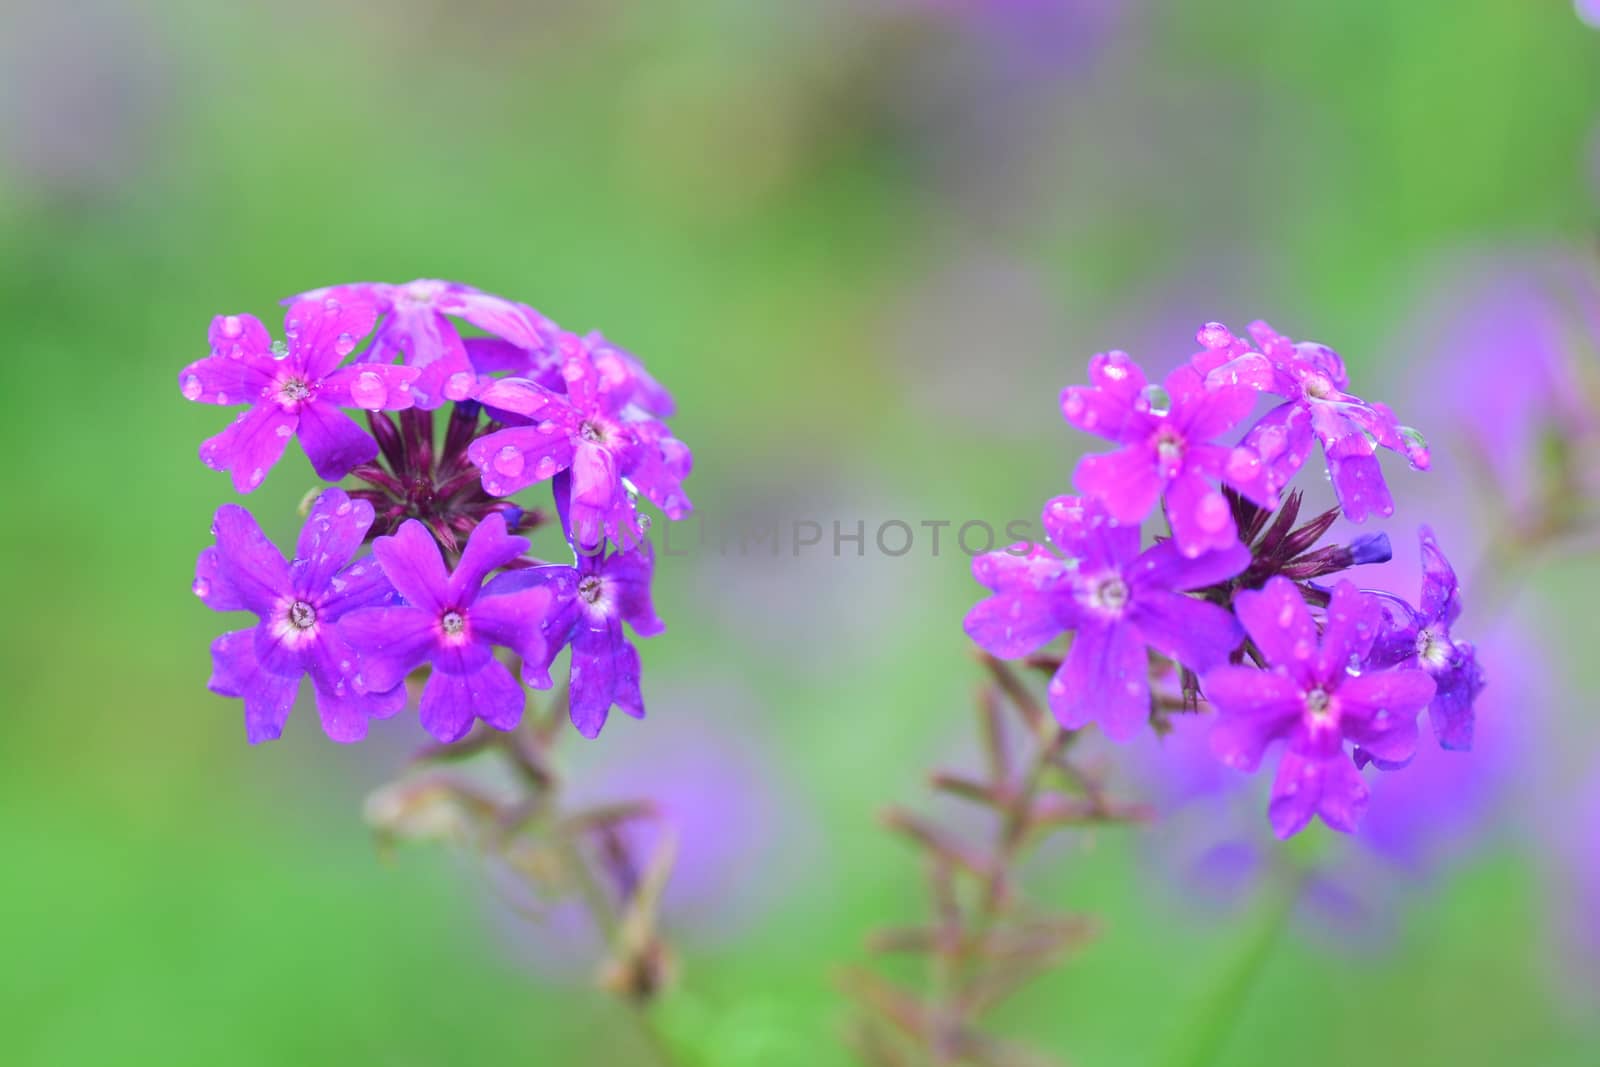 Blooming purple Verbena flowers, note select focus the left with shallow depth of field